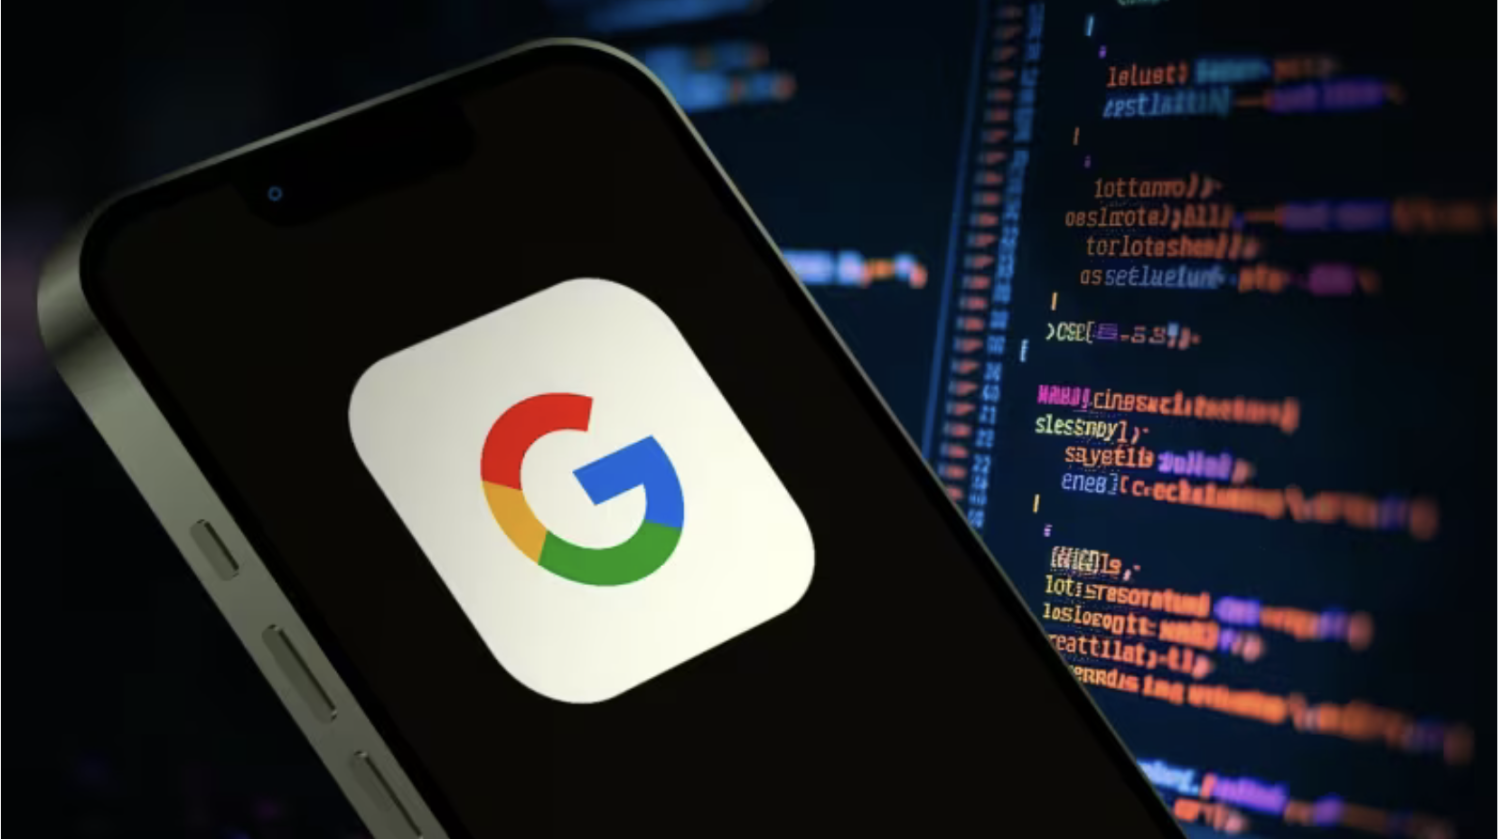 Google says it will make its dark web monitoring tool widely available for free later this month, so users can scan to see if hackers have exposed their email address and other personal information. (L.J. Cake/CBC News)